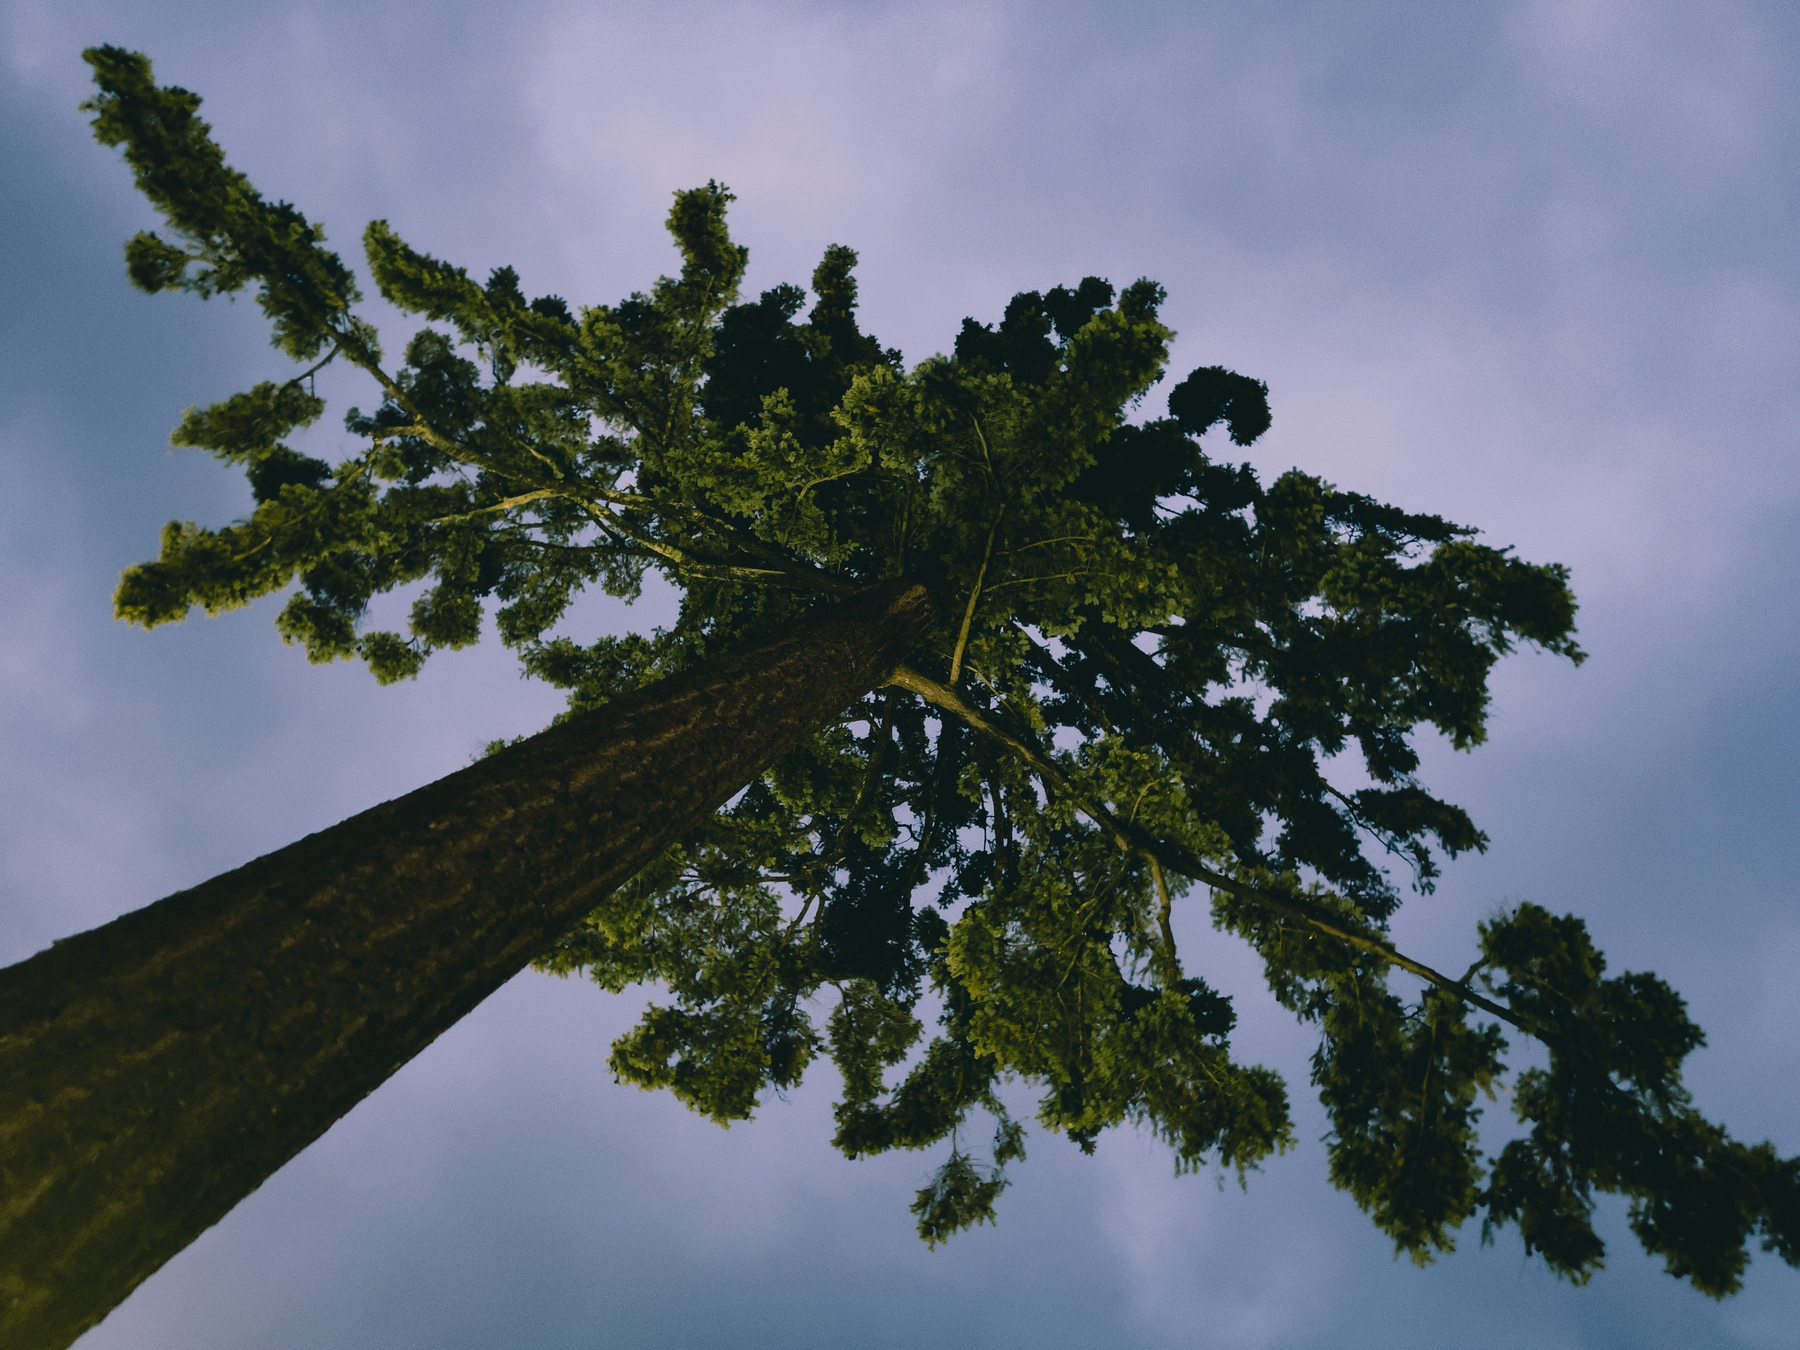 Evergreen tree canopy and trunk against a cloudy sky.